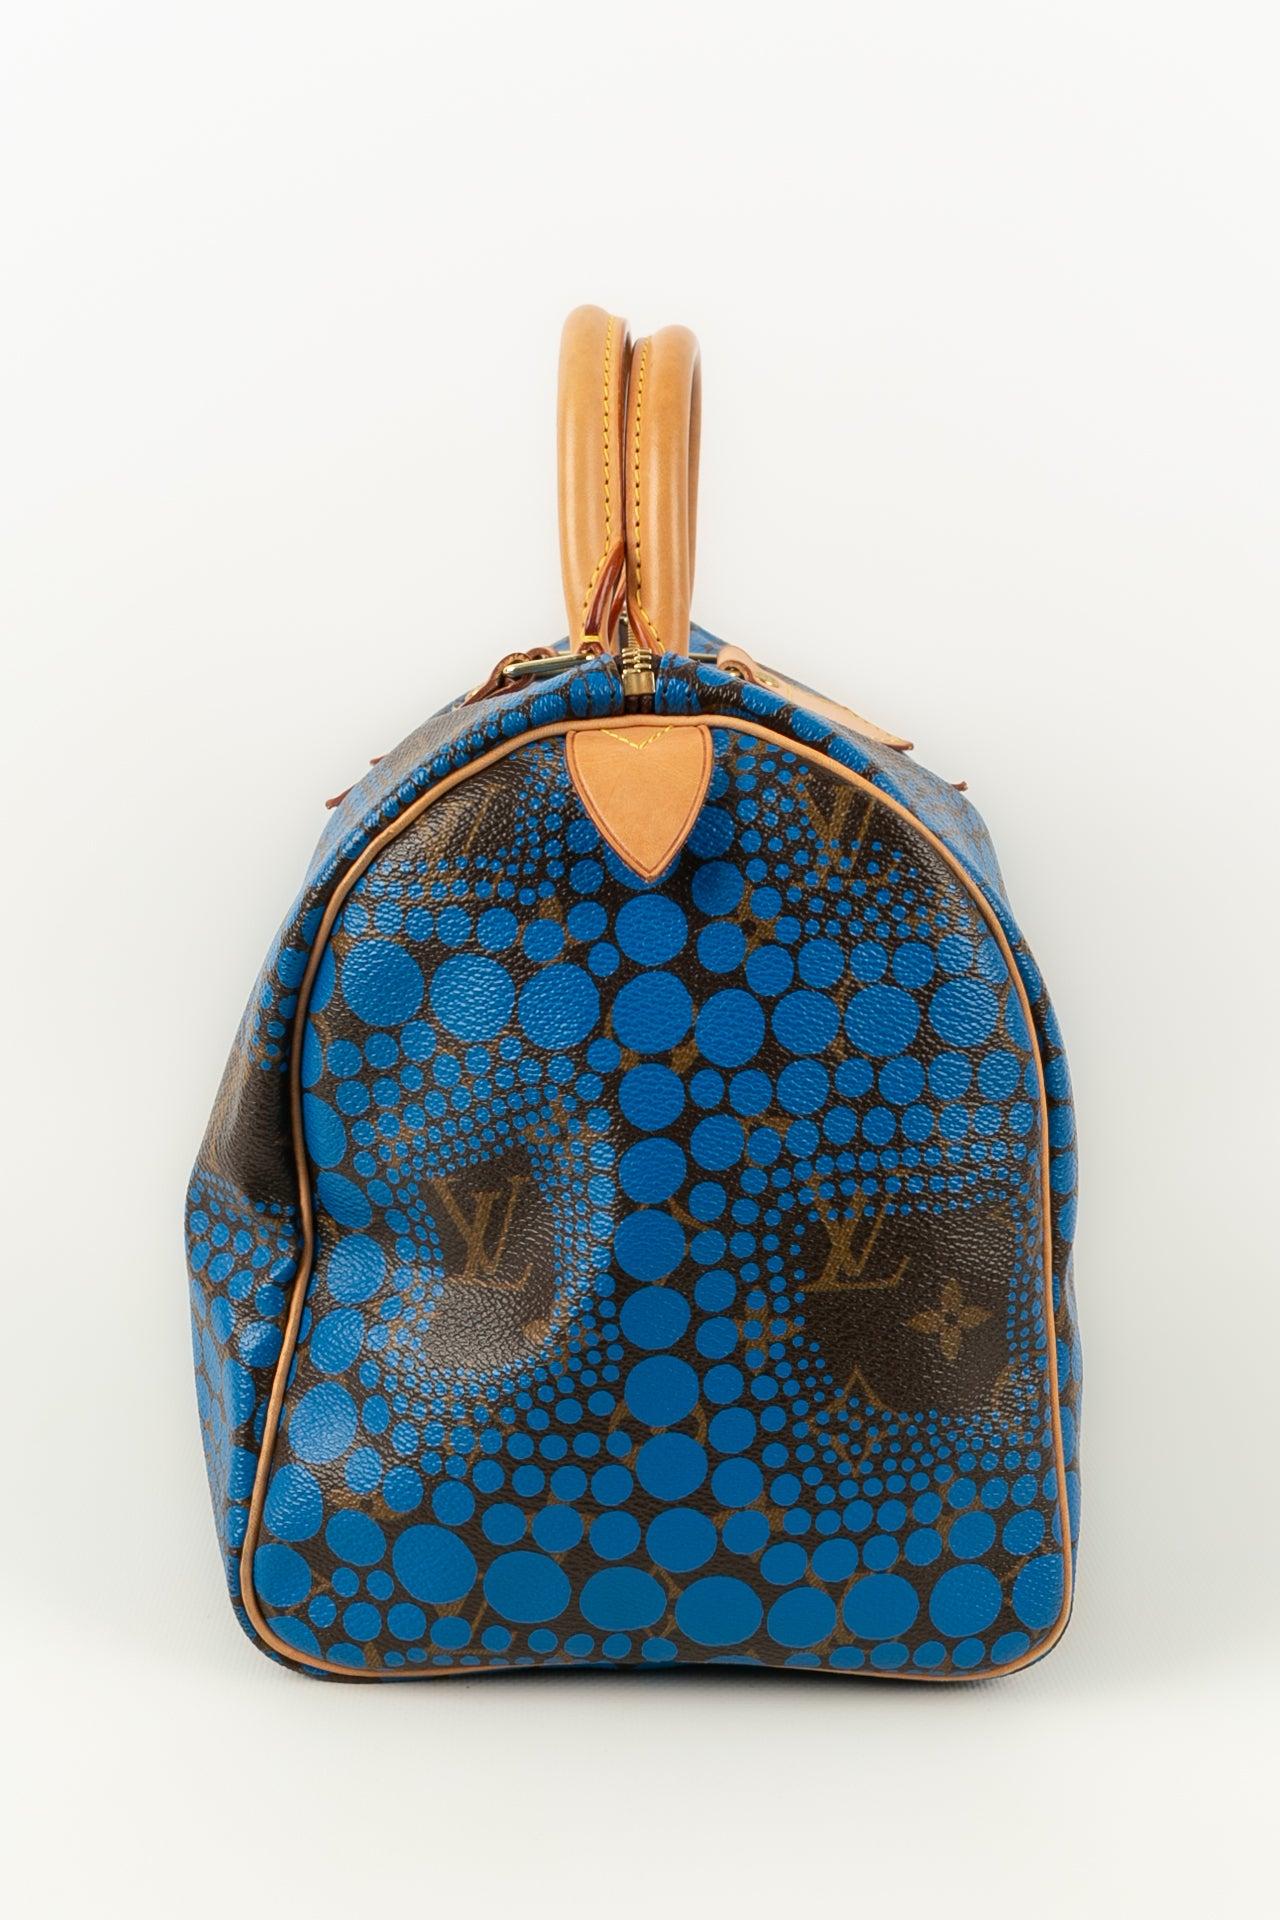 Blue Louis Vuitton Leather Bag by Yayoi Kusama For Sale